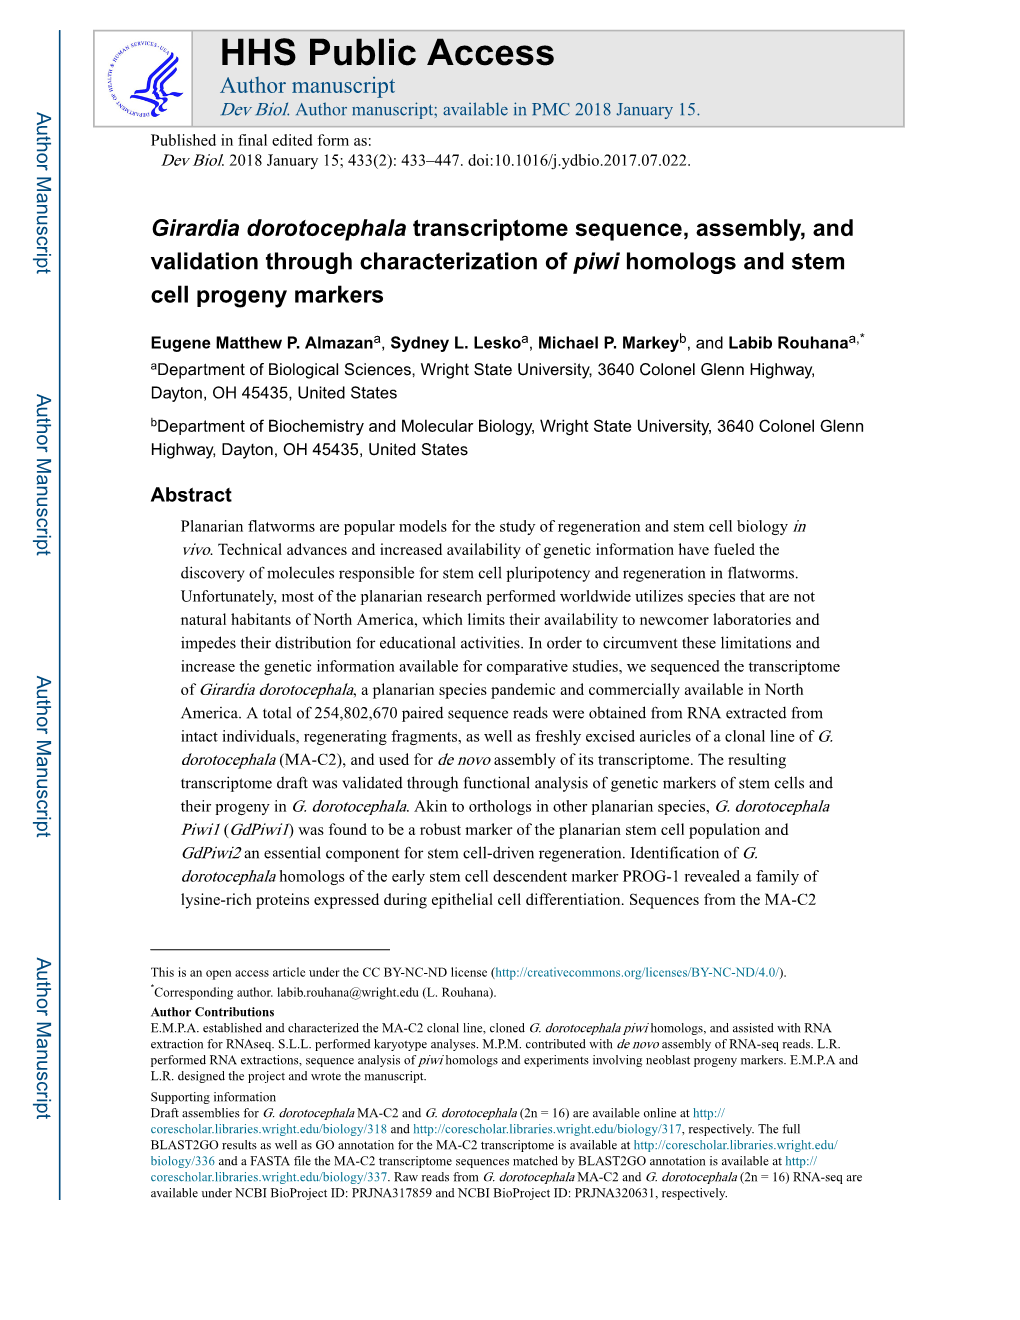 Girardia Dorotocephala Transcriptome Sequence, Assembly, and Validation Through Characterization of Piwi Homologs and Stem Cell Progeny Markers